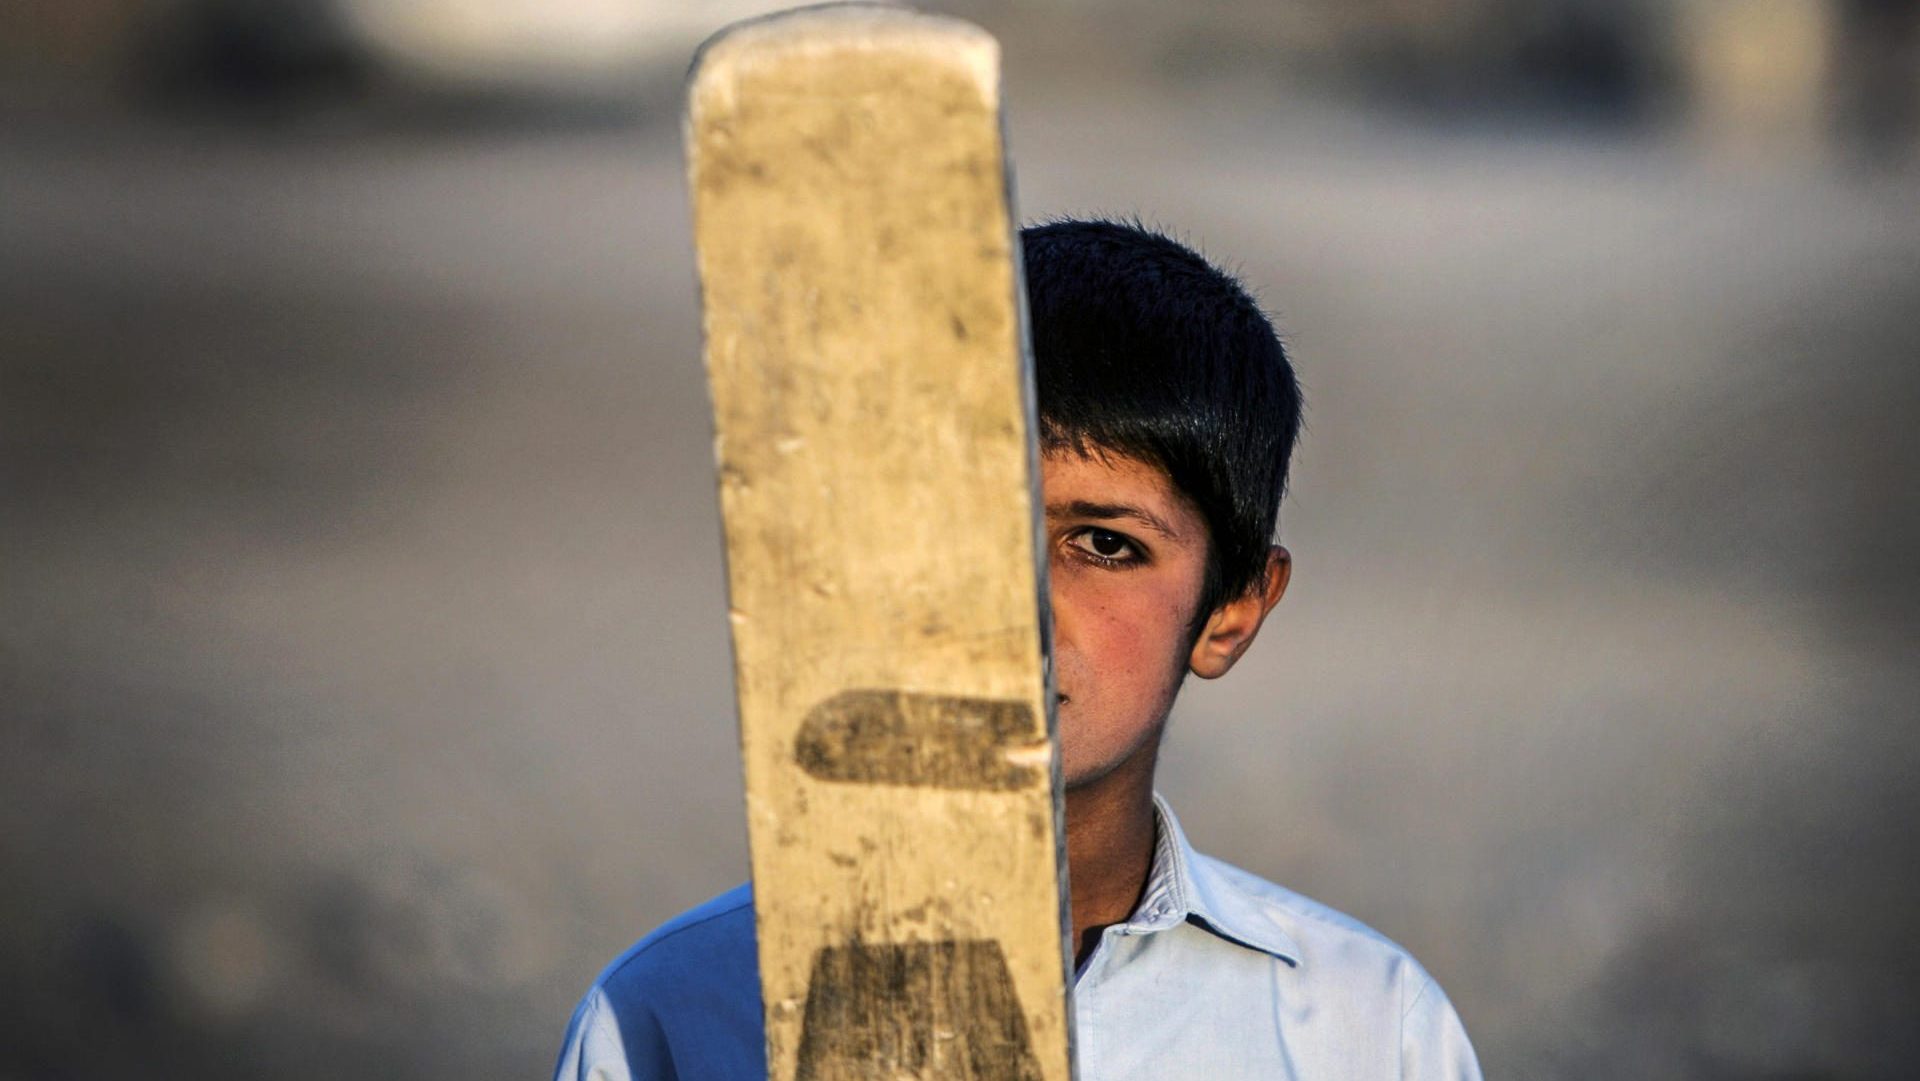 A young Afghan plays cricket on the outskirts of Kabul, Afghanistan, 15 January 2015. EPA/FILE/HEDAYATULLAH AMID